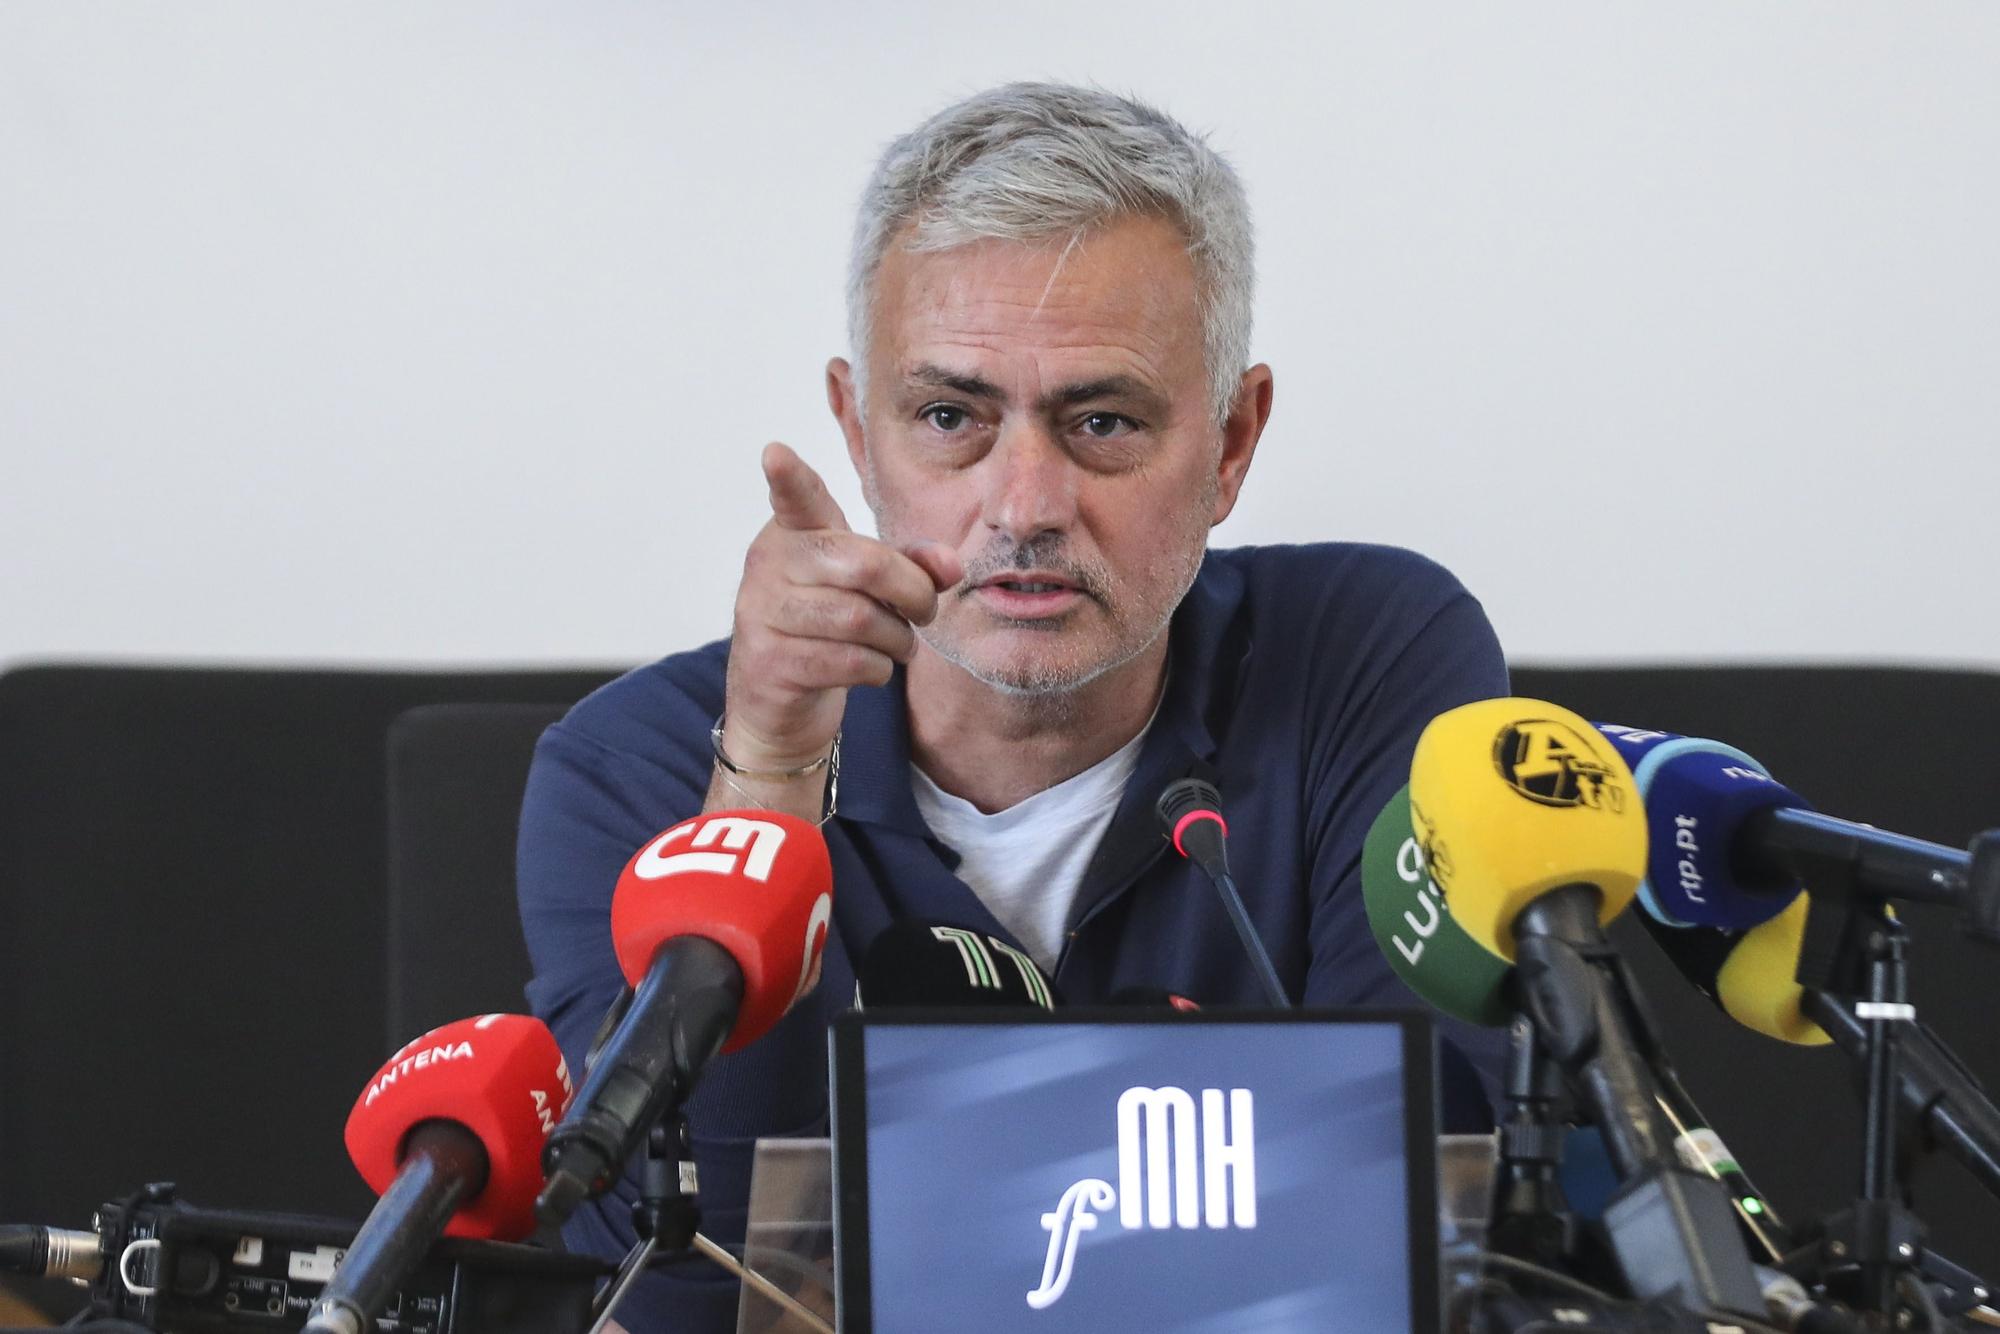 Jose Mourinho attends a press conference at the School of Human Kinetics